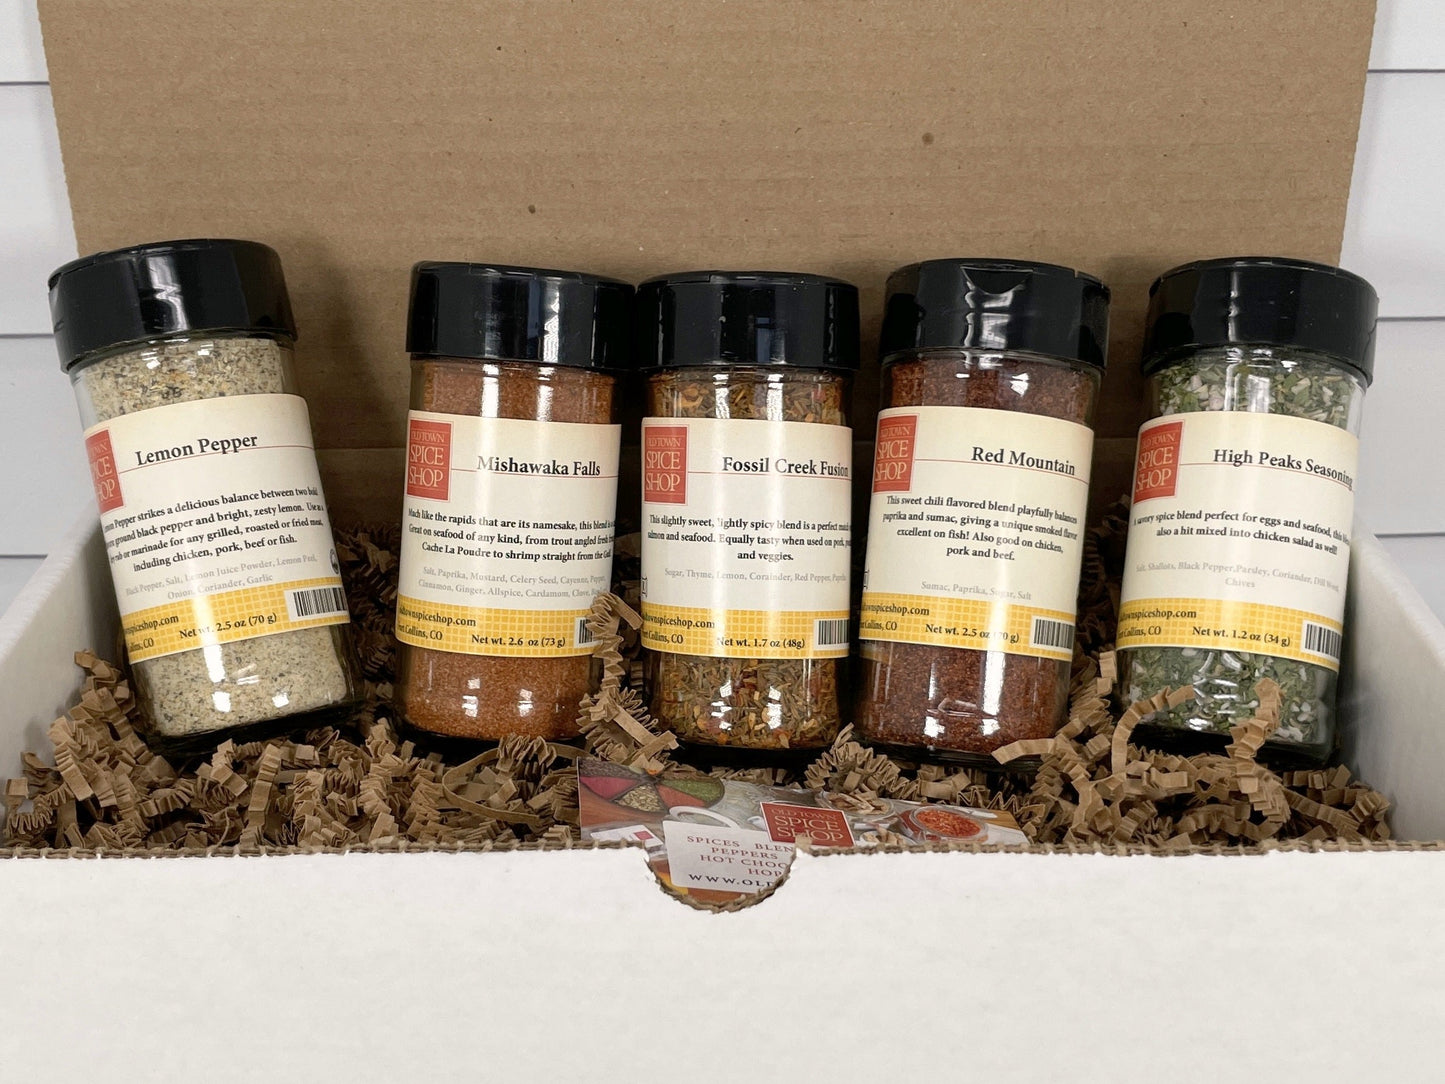 Catch of the Day Gift Box - Fish and Seafood Seasonings